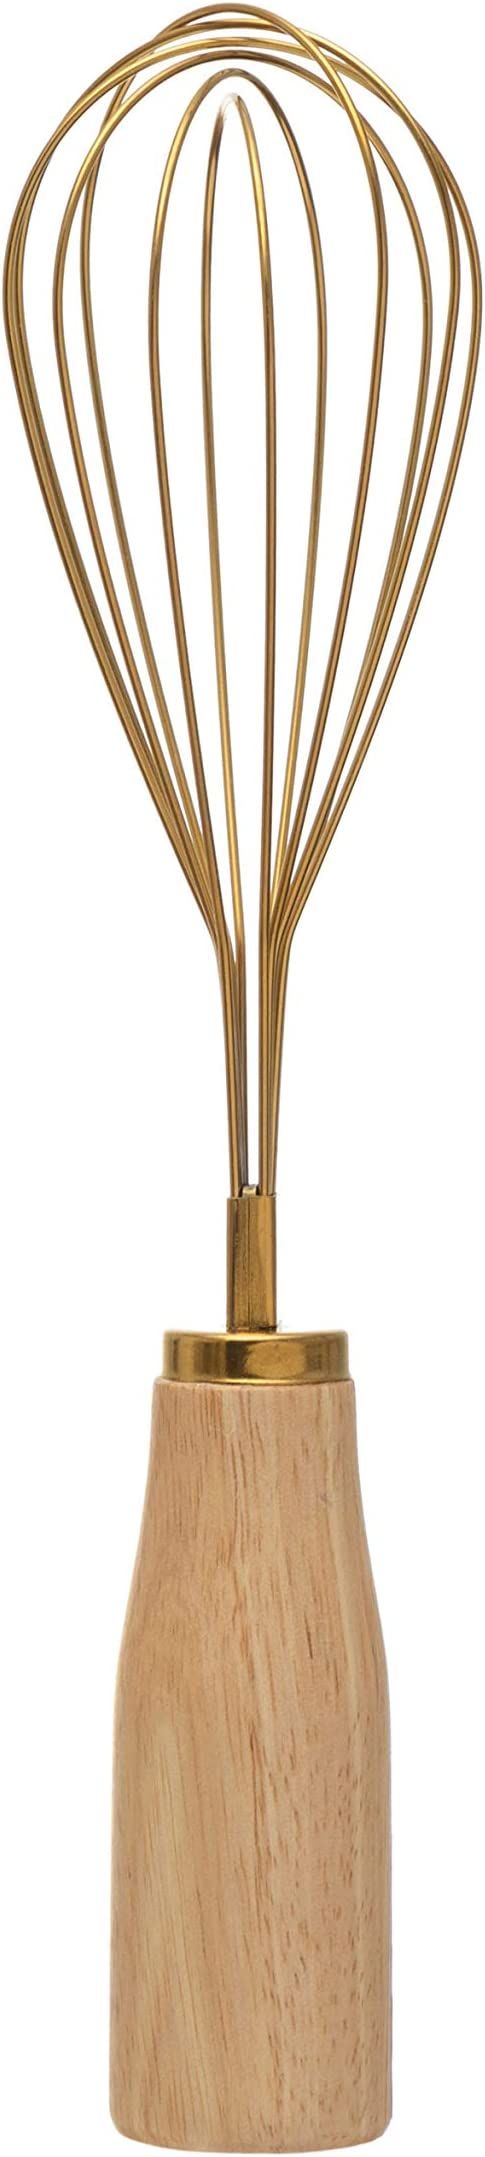 Bloomingville Standing Stainless Steel Wood Handle, Gold Finish Whisk, 10.25" | Amazon (CA)